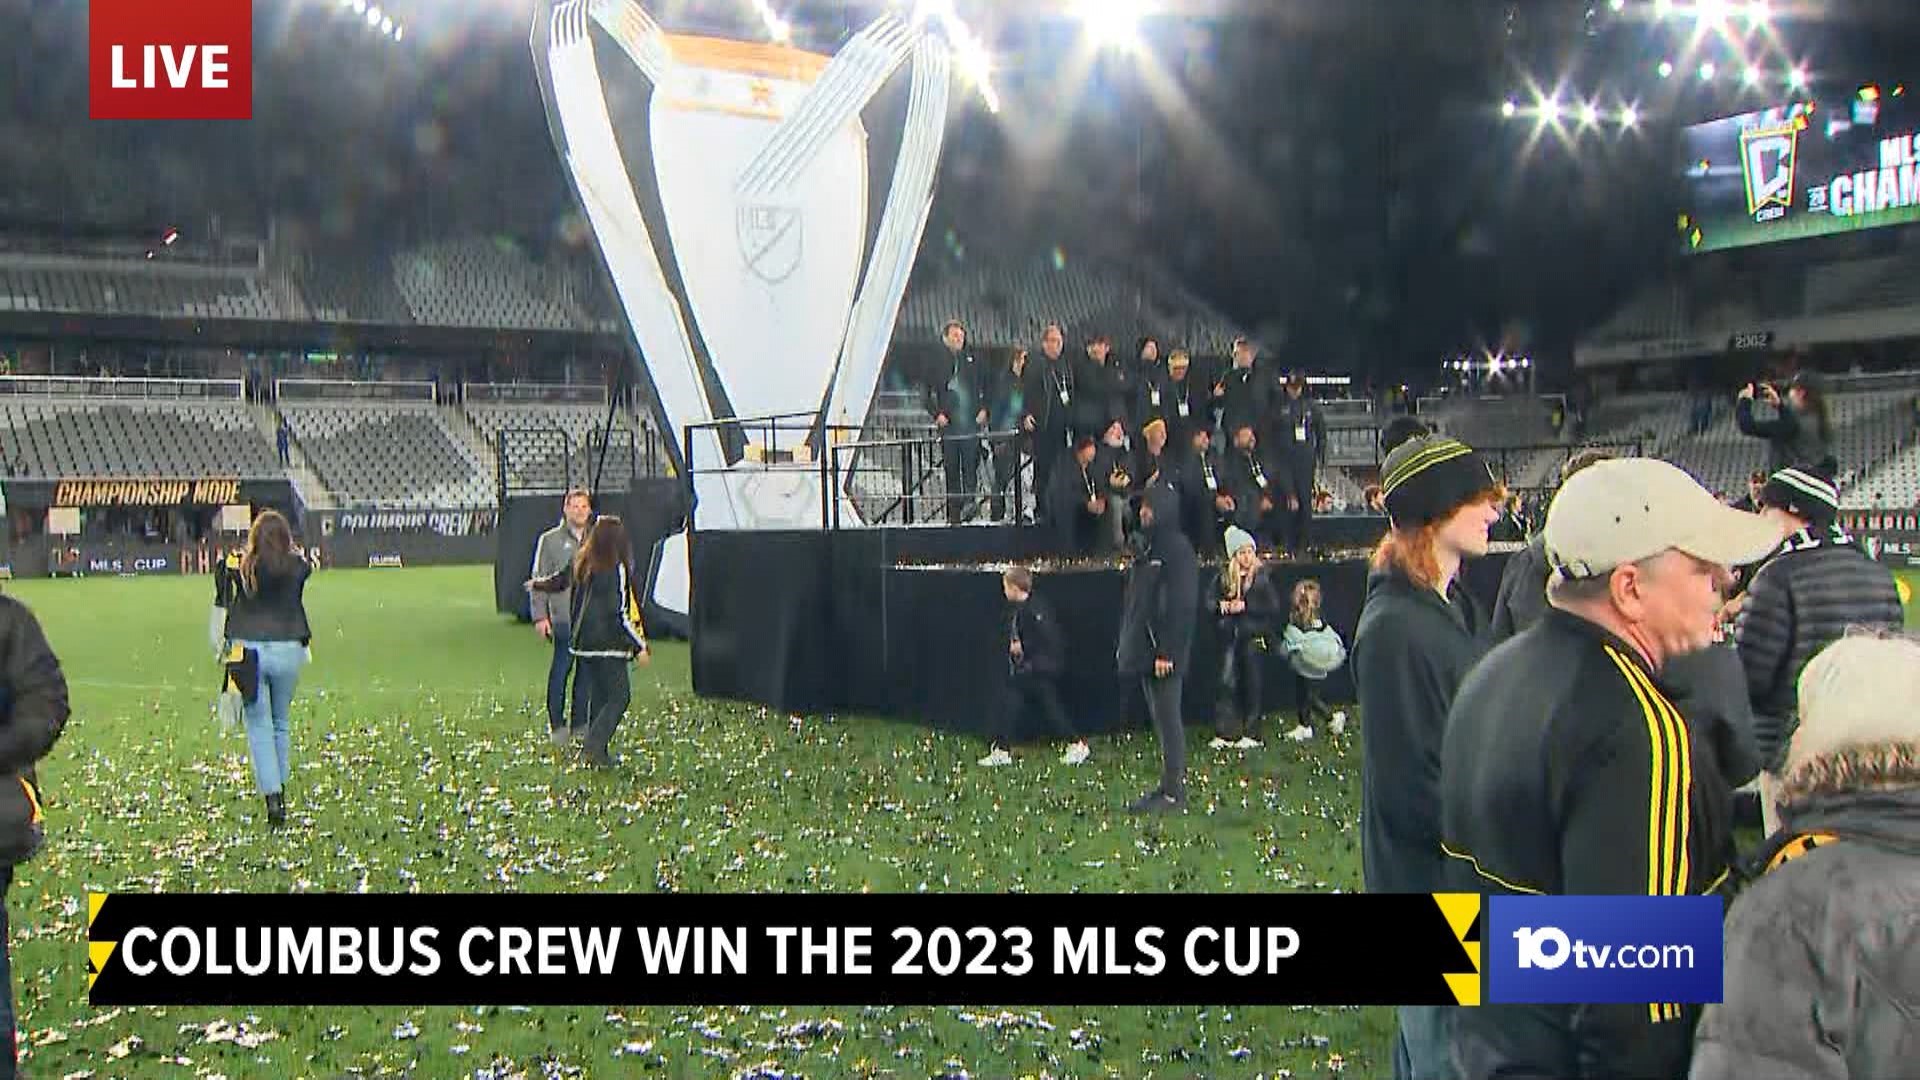 The Crew beat defending champion Los Angeles FC 2-1 for their second MLS Cup win in the last four years.